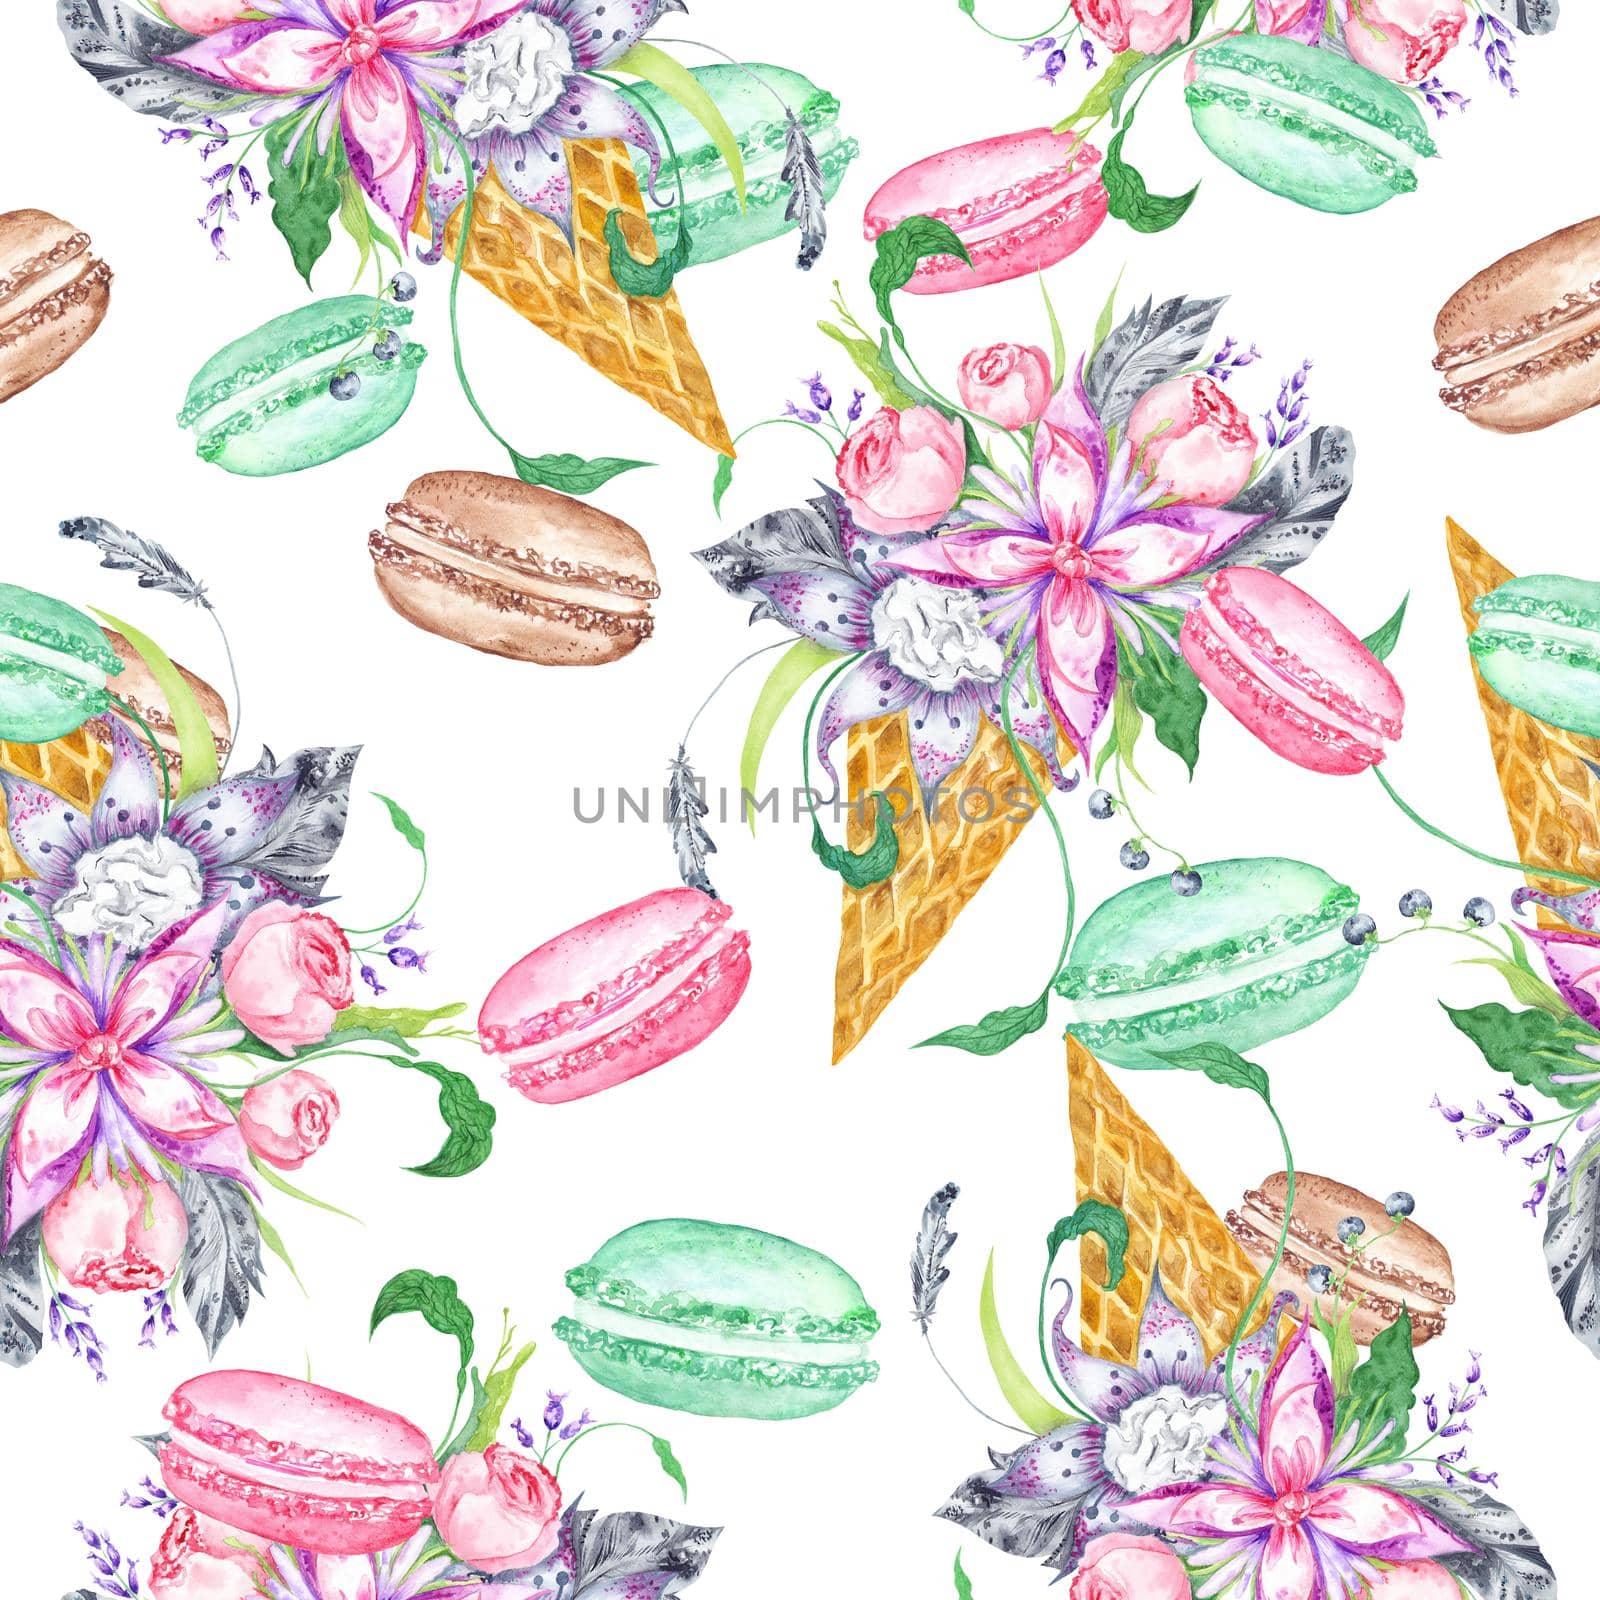 Floral Ice Cream and macaroon watercolor pattern by kisika